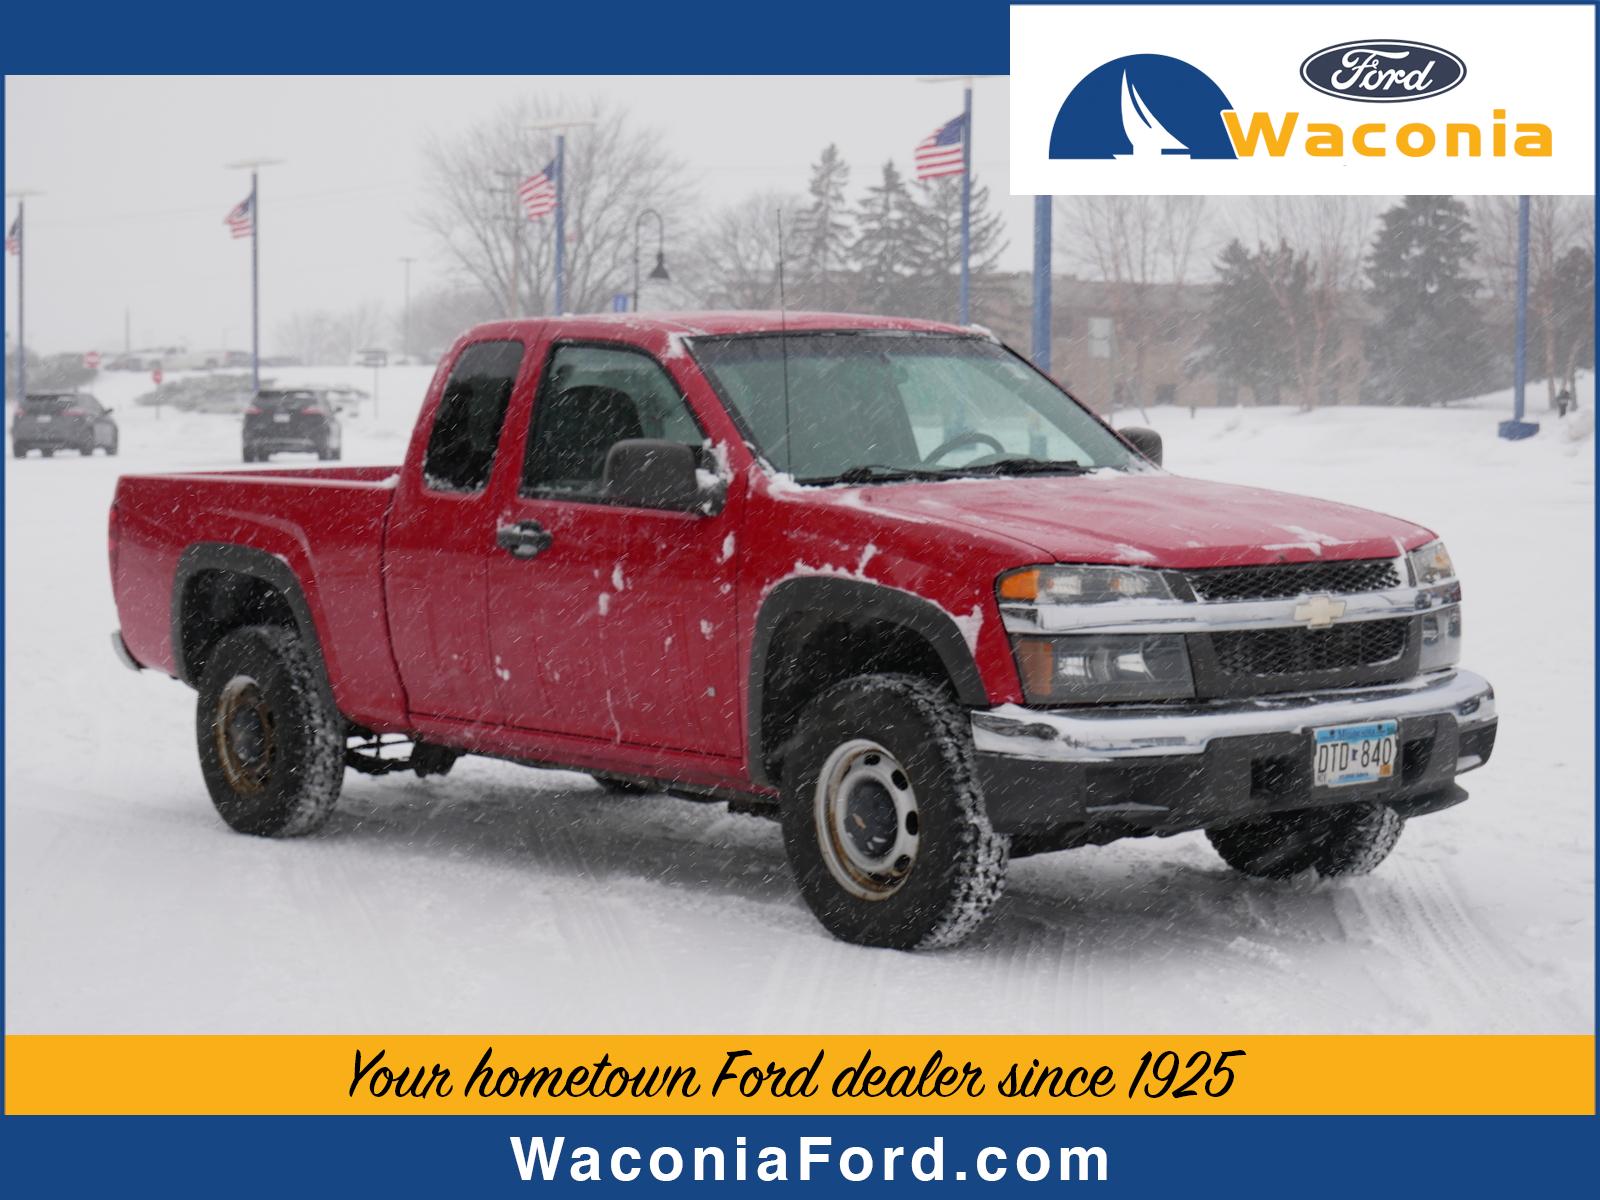 Used 2006 Chevrolet Colorado LS with VIN 1GCDT198668220518 for sale in Waconia, Minnesota